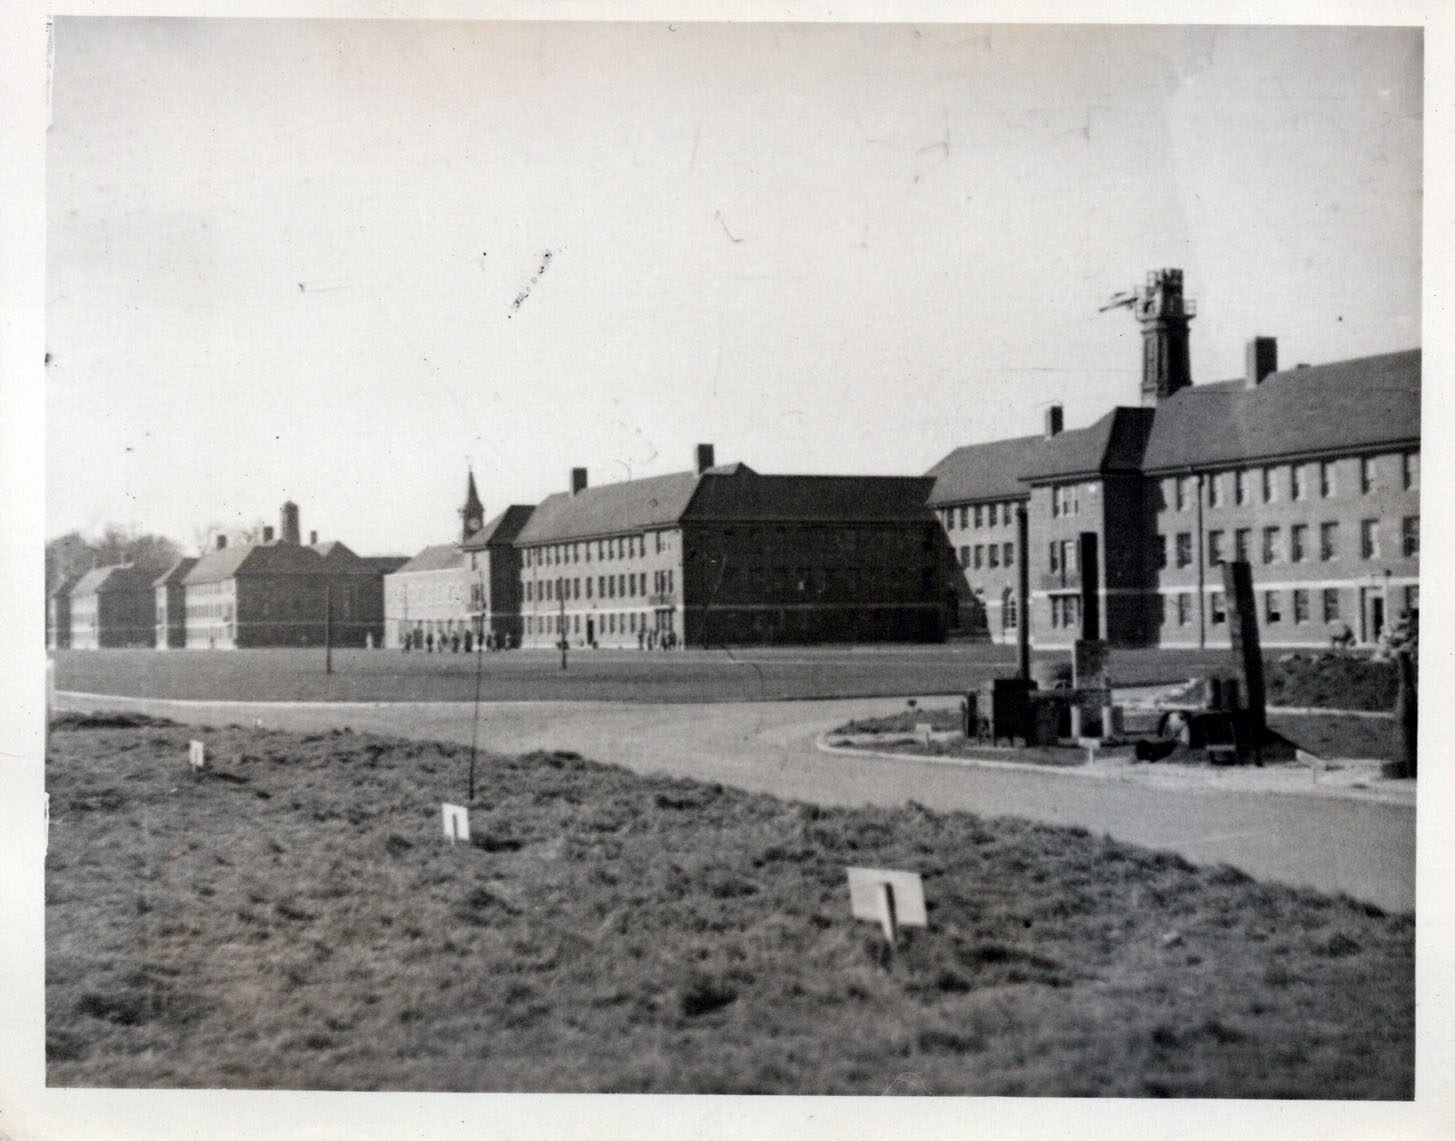 The early buildings of the military college at Shrivenham. Photo from the John & Marjorie Hill Collection